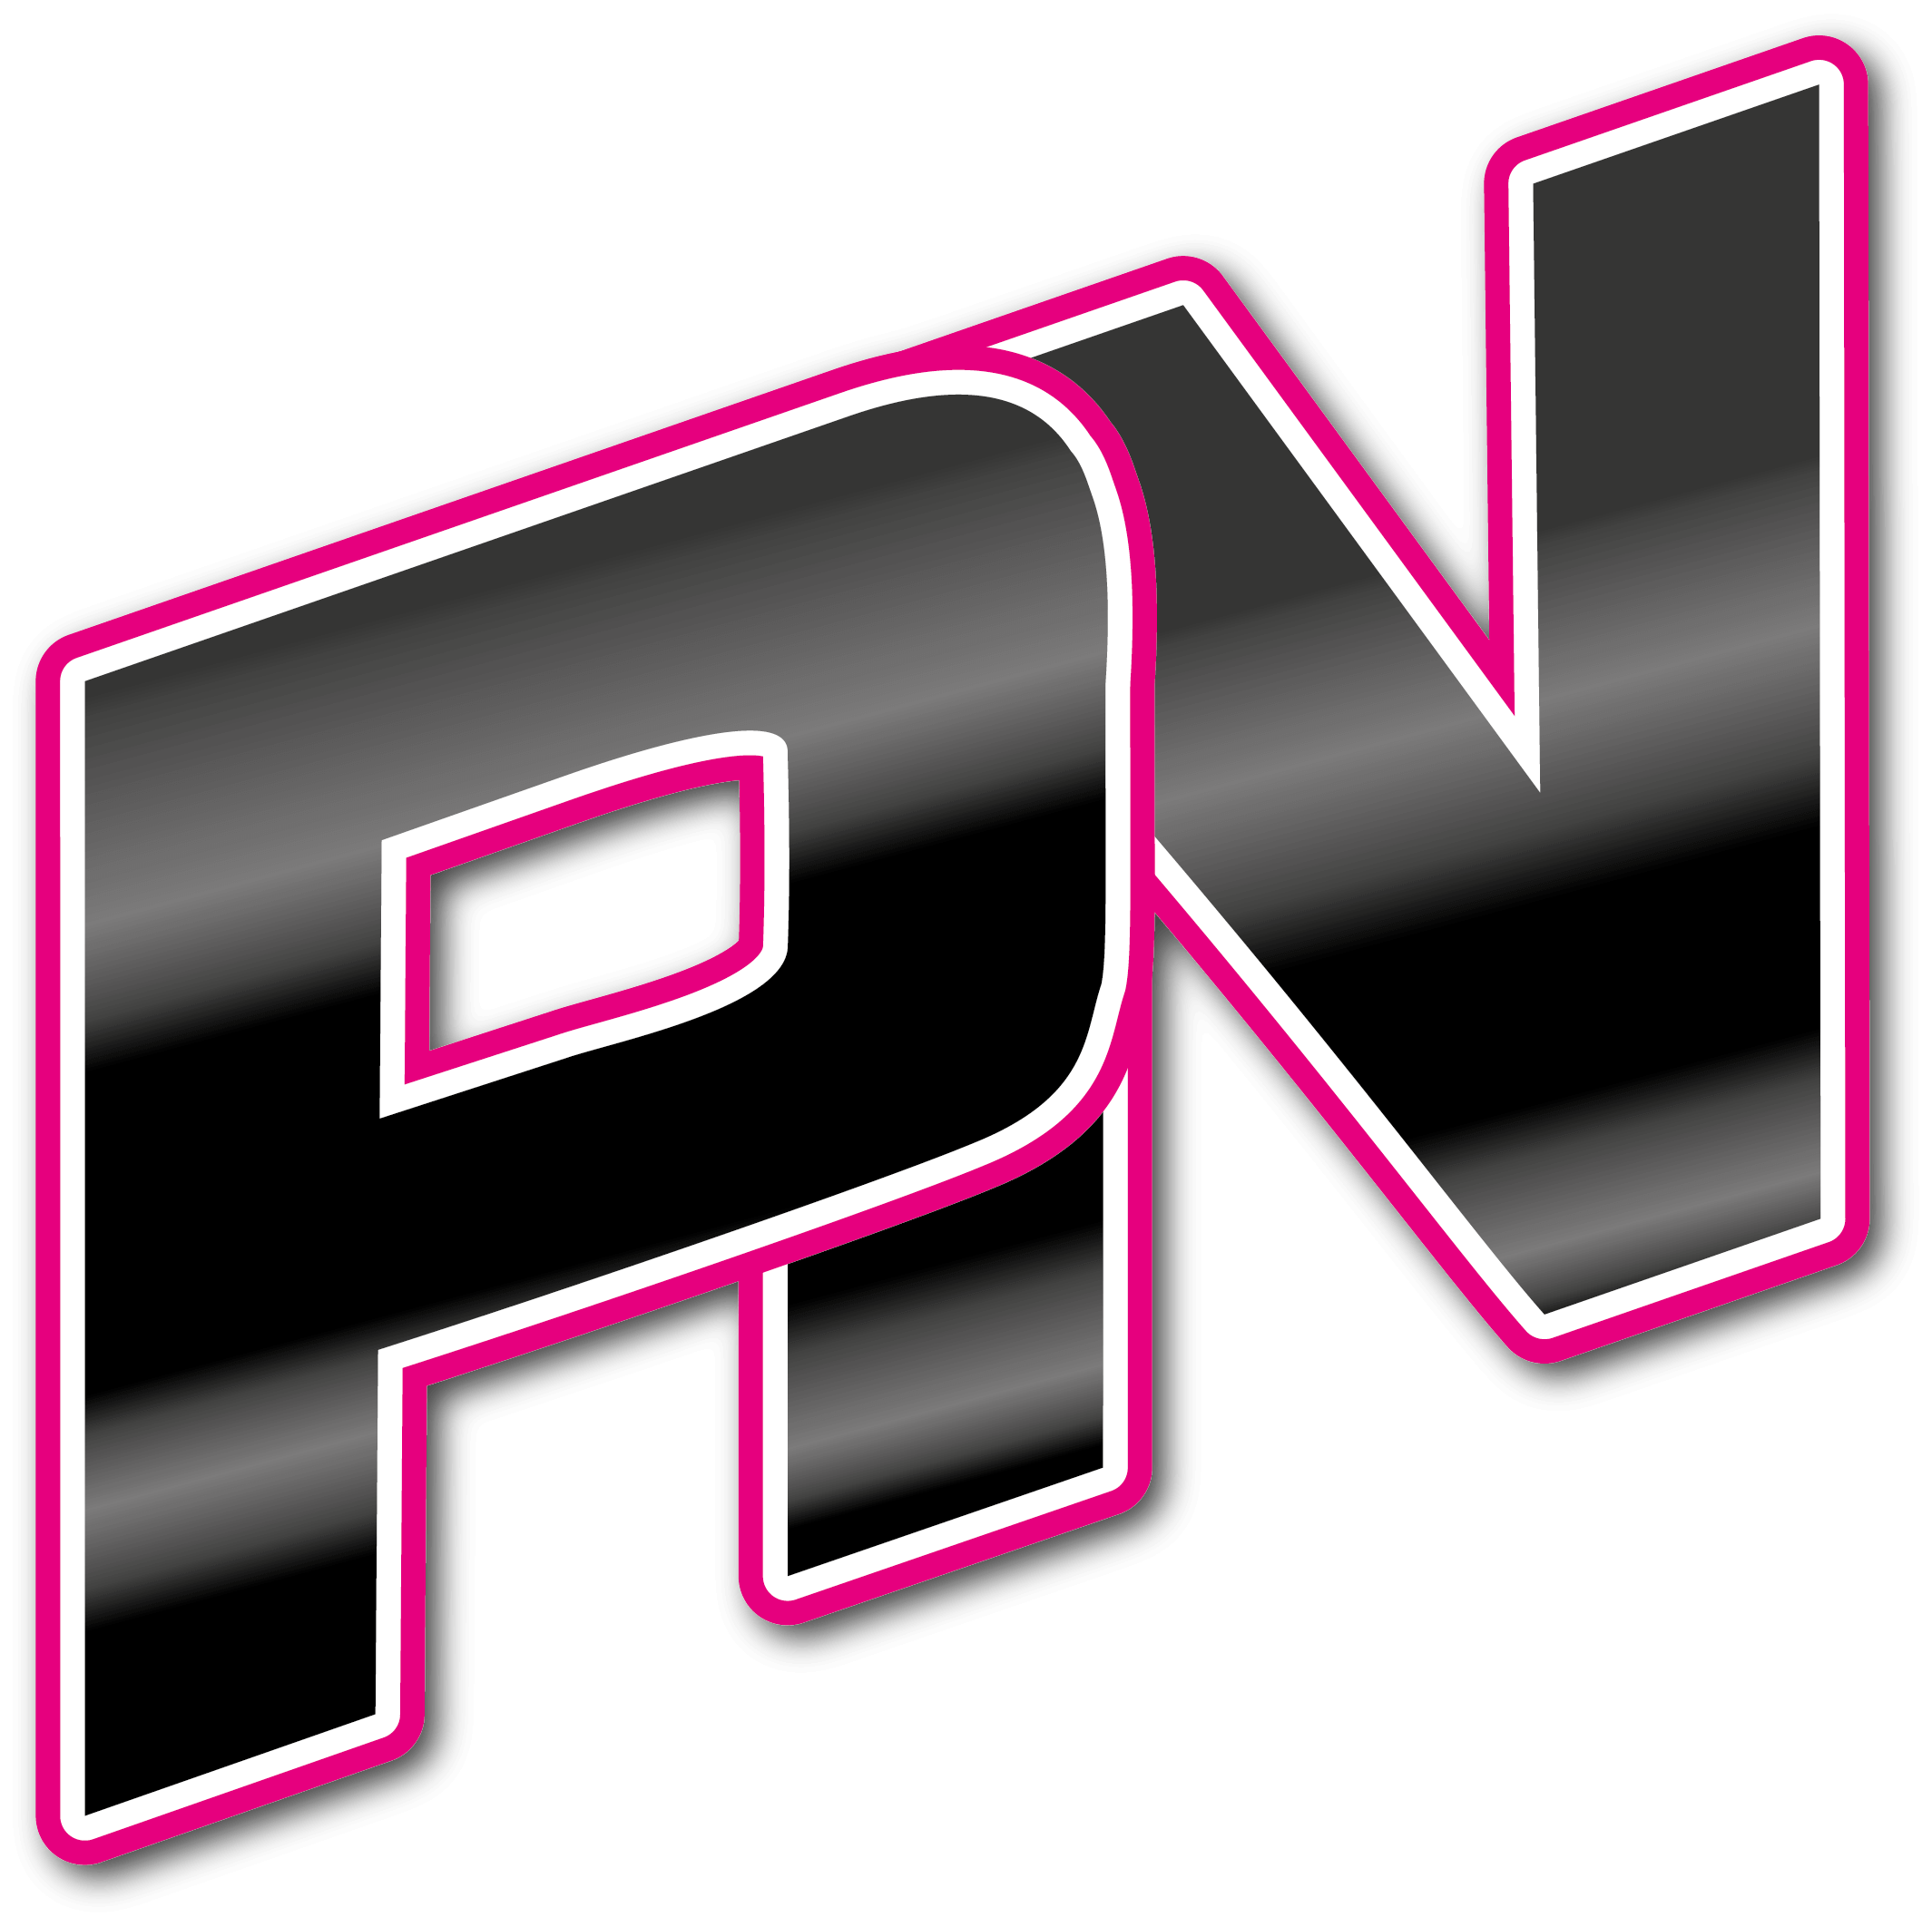 PN logo in black and pink